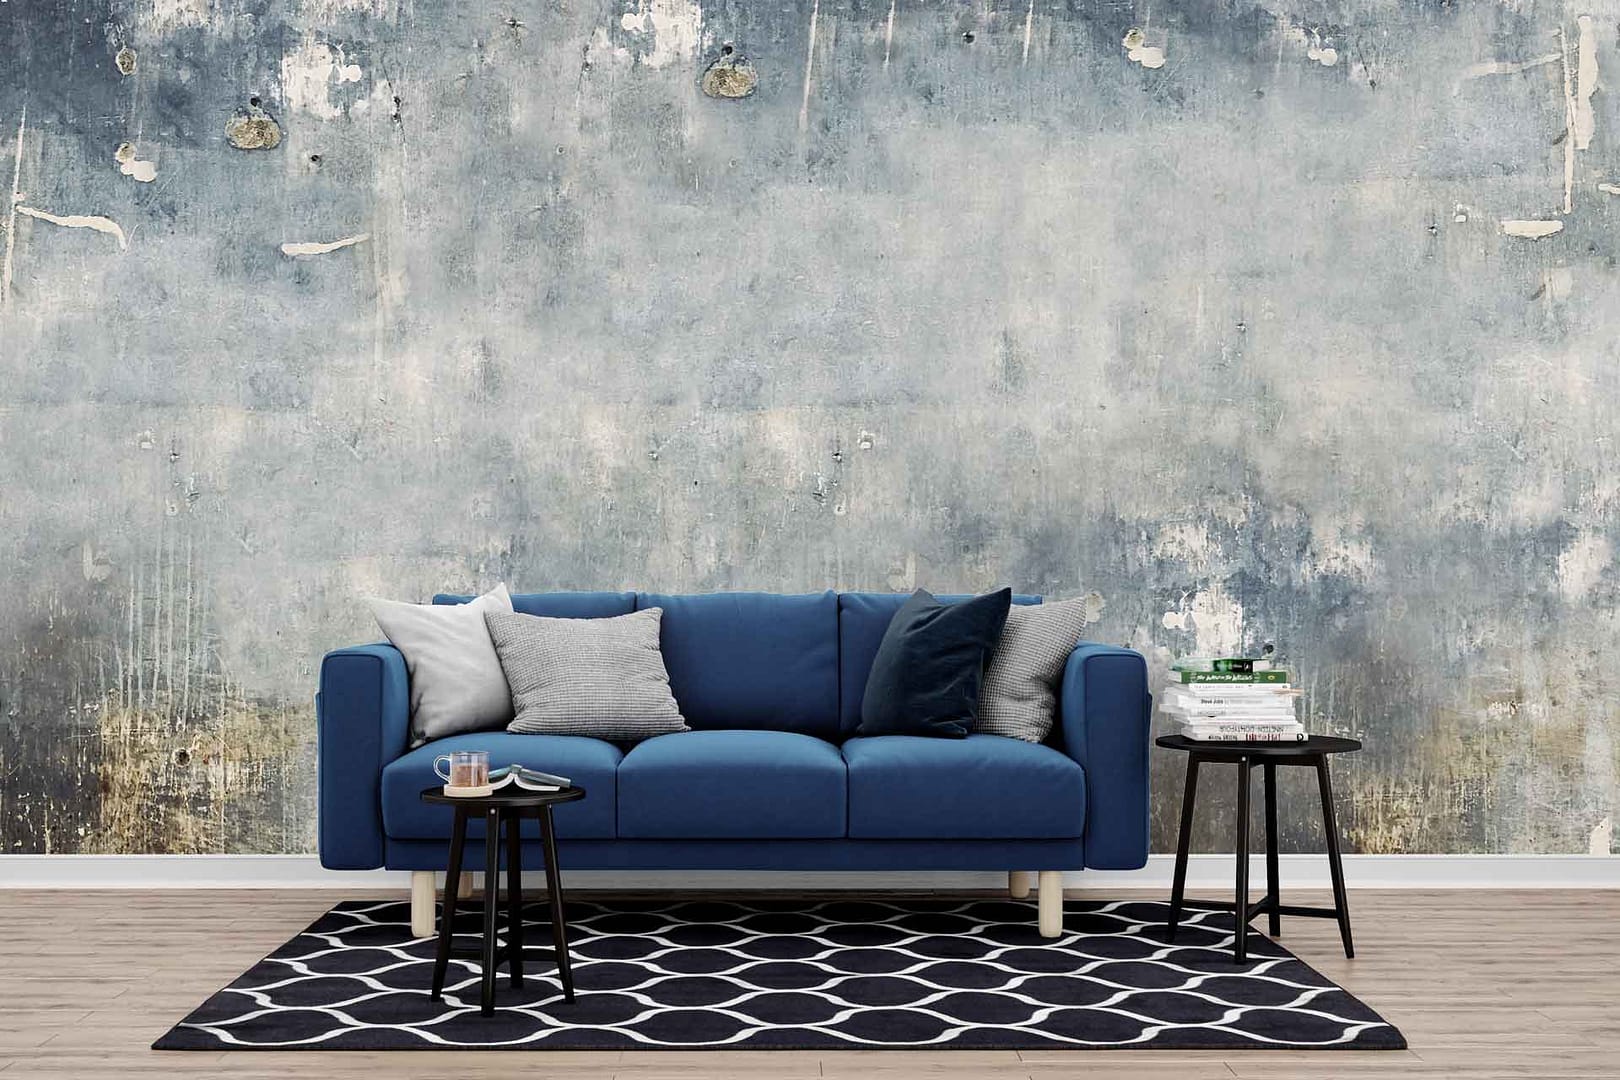 Turn Around - a wallpaper of a grunge concrete wall, blue ombre at the top and slight brown colouration at the bottom by Cara Saven Wall Design